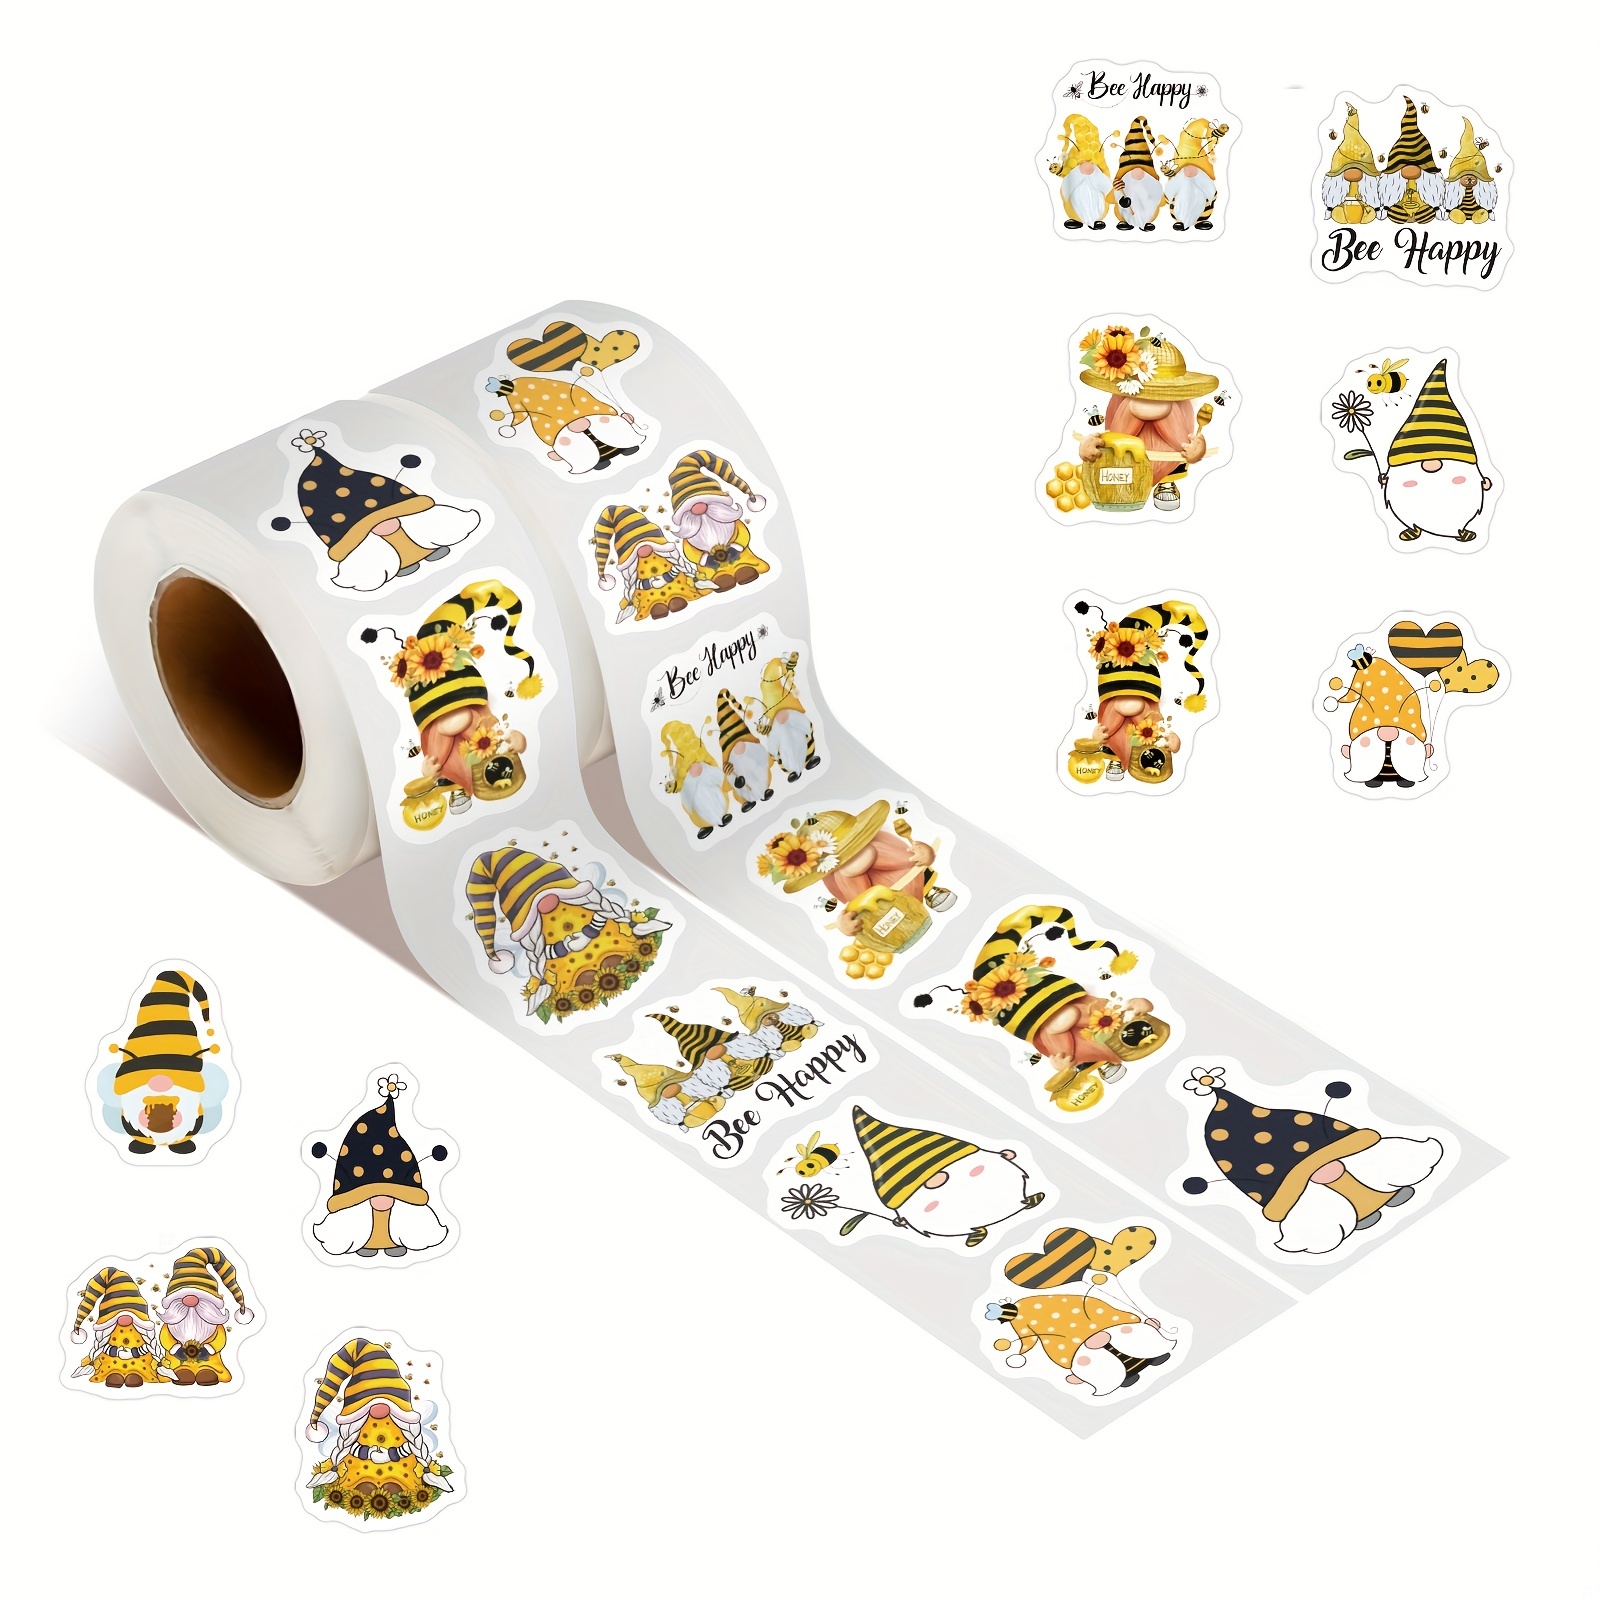 

500pcs Bee Gnome Stickers Roll Cute Cartoon Aesthetic Vinyl Sticker Decals For Water Bottle, Laptop, Phone, Skateboard, Scrapbooking, Gutair Gifts For Teens Adults For Party Supply Favor Reward